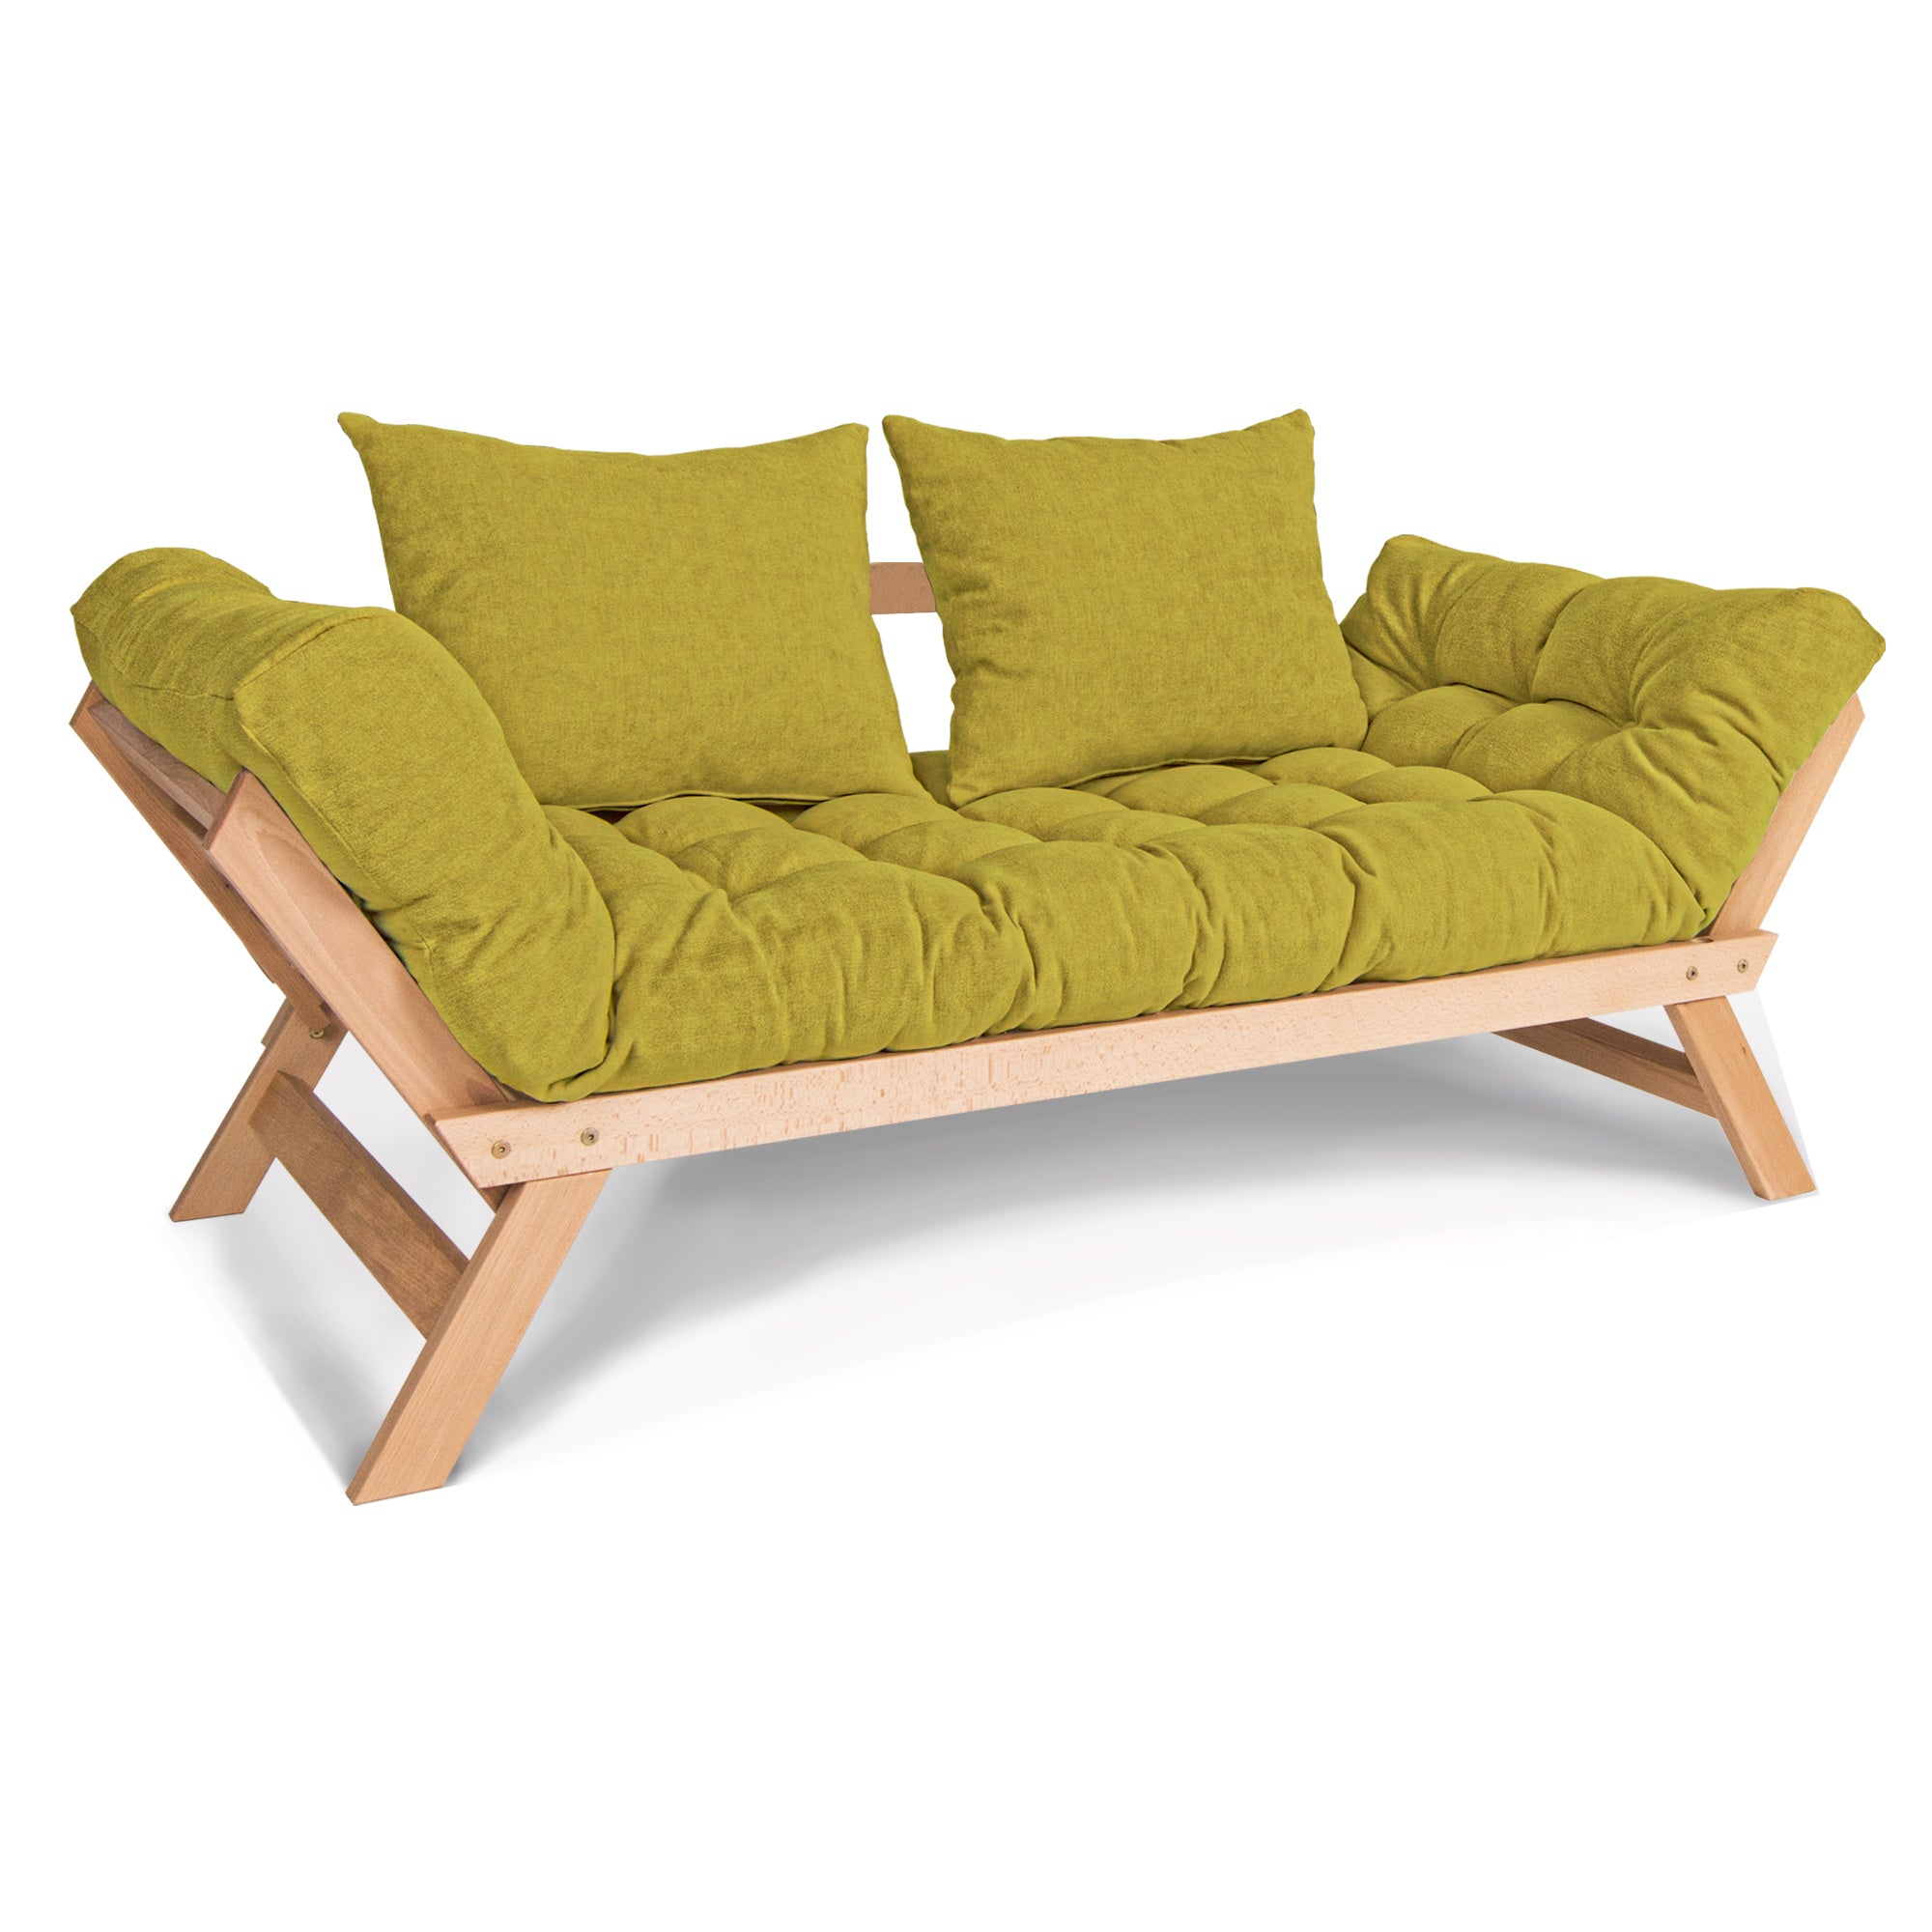 ALLEGRO Folding Sofa Bed, Beech Wood Frame, Natural Colour upholstery colour  green